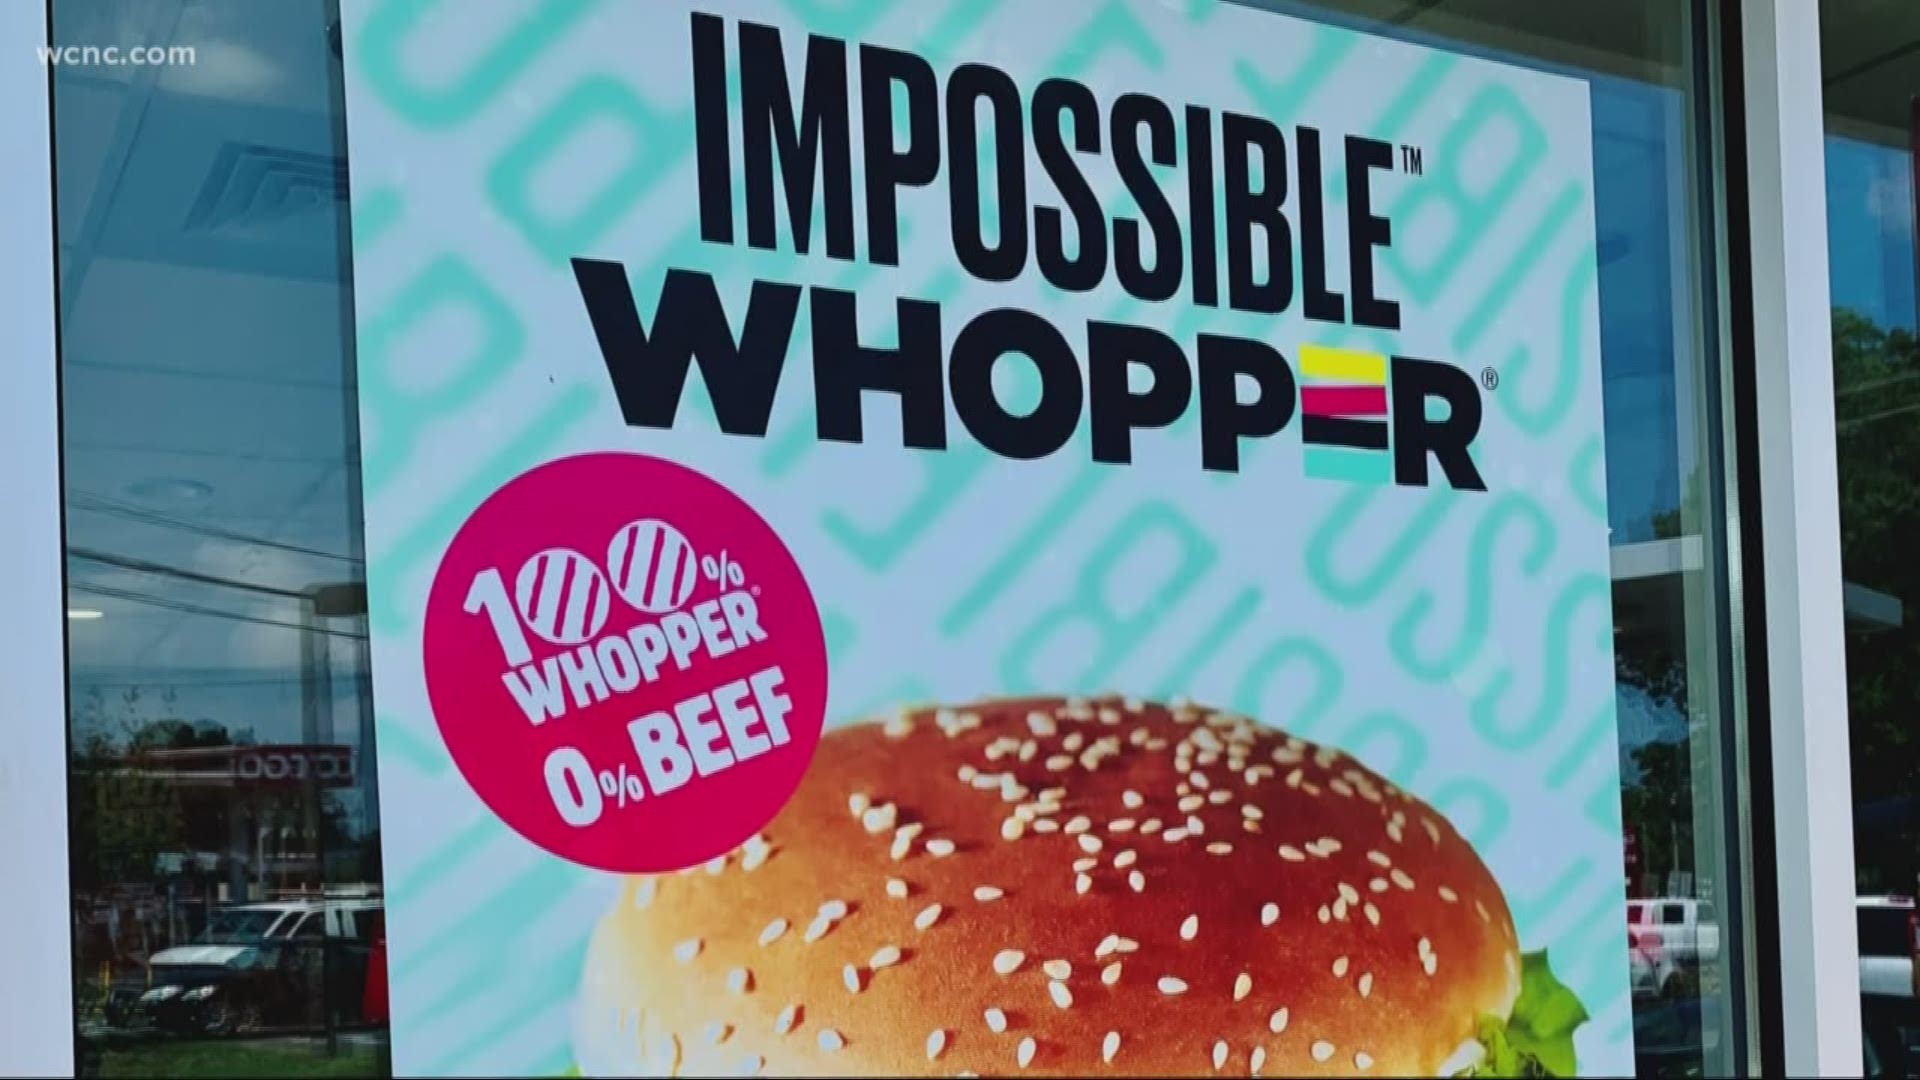 Have you tried the Impossible Whopper? Burger King is now making a version with a plant-based protein patty.